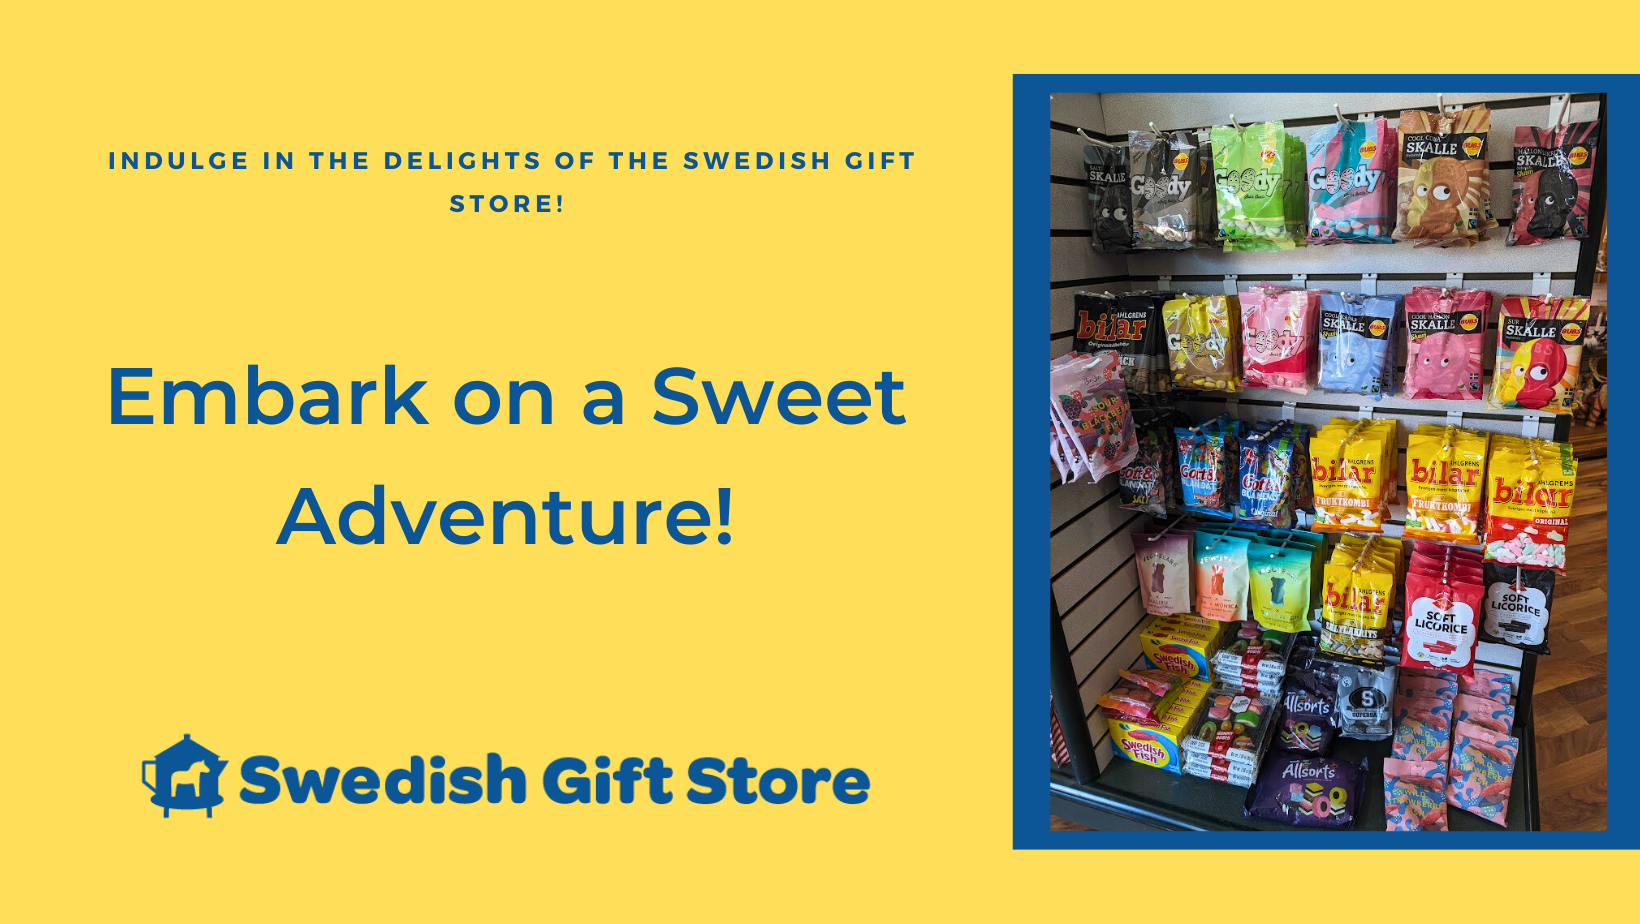 Embark on a Sweet Adventure: Indulge in the Delights of the Swedish Gift Store!